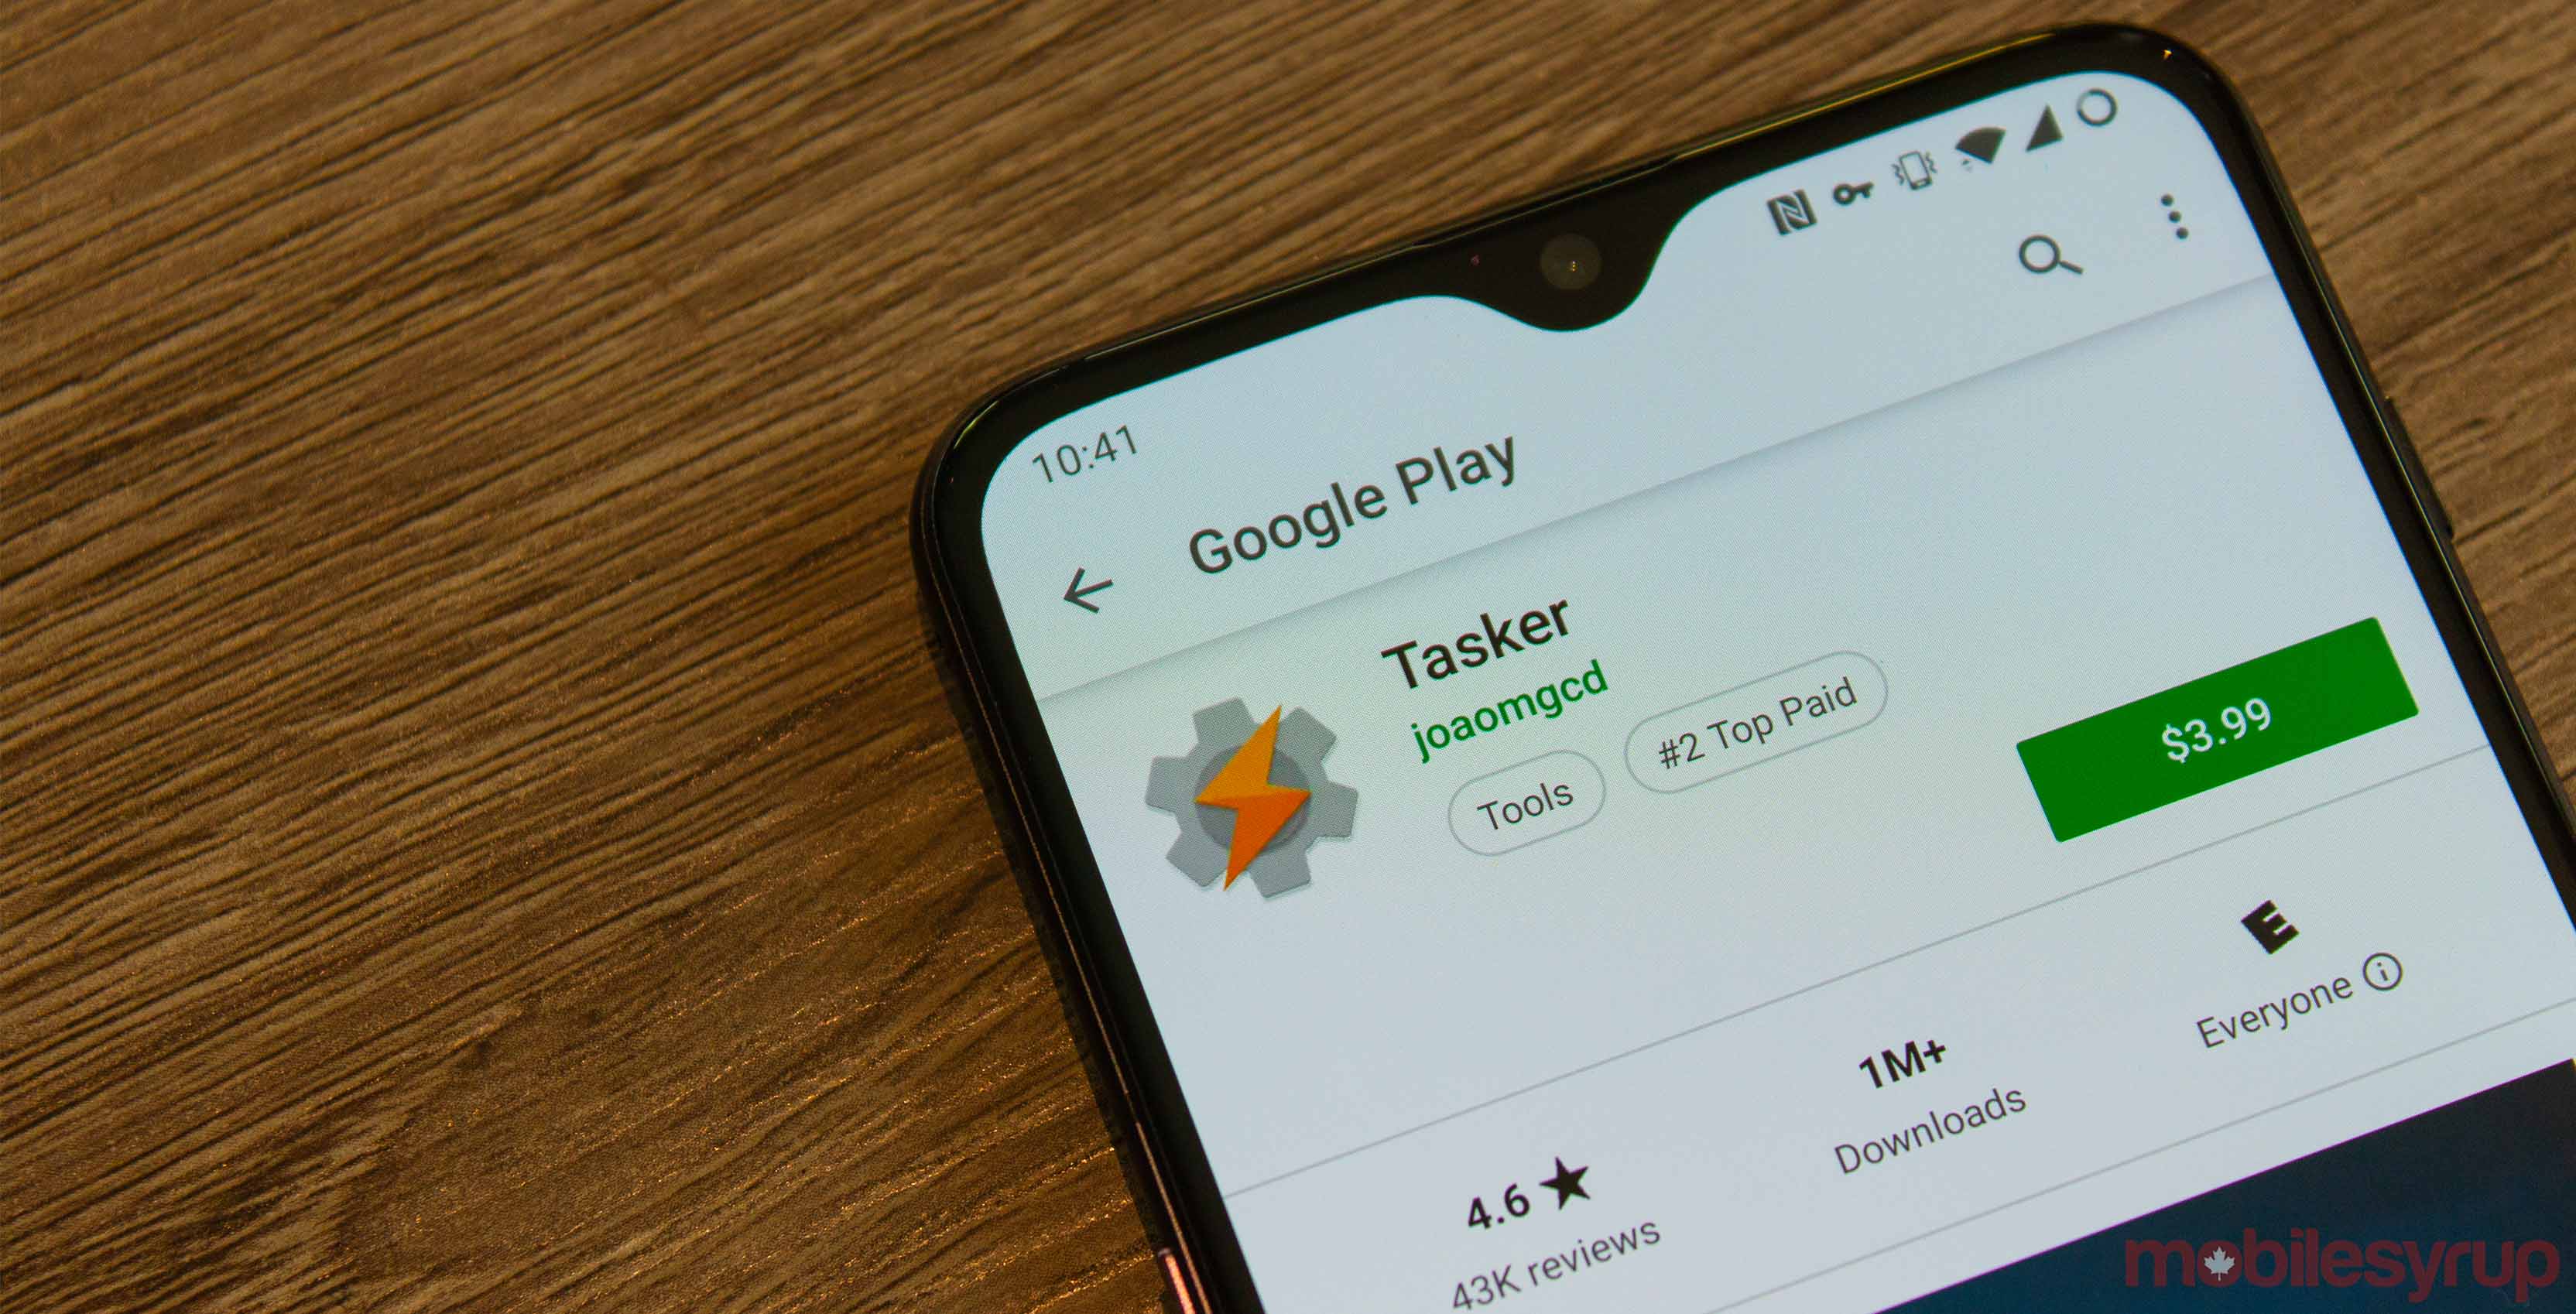 Google exempt Tasker from call log and permissions restriction